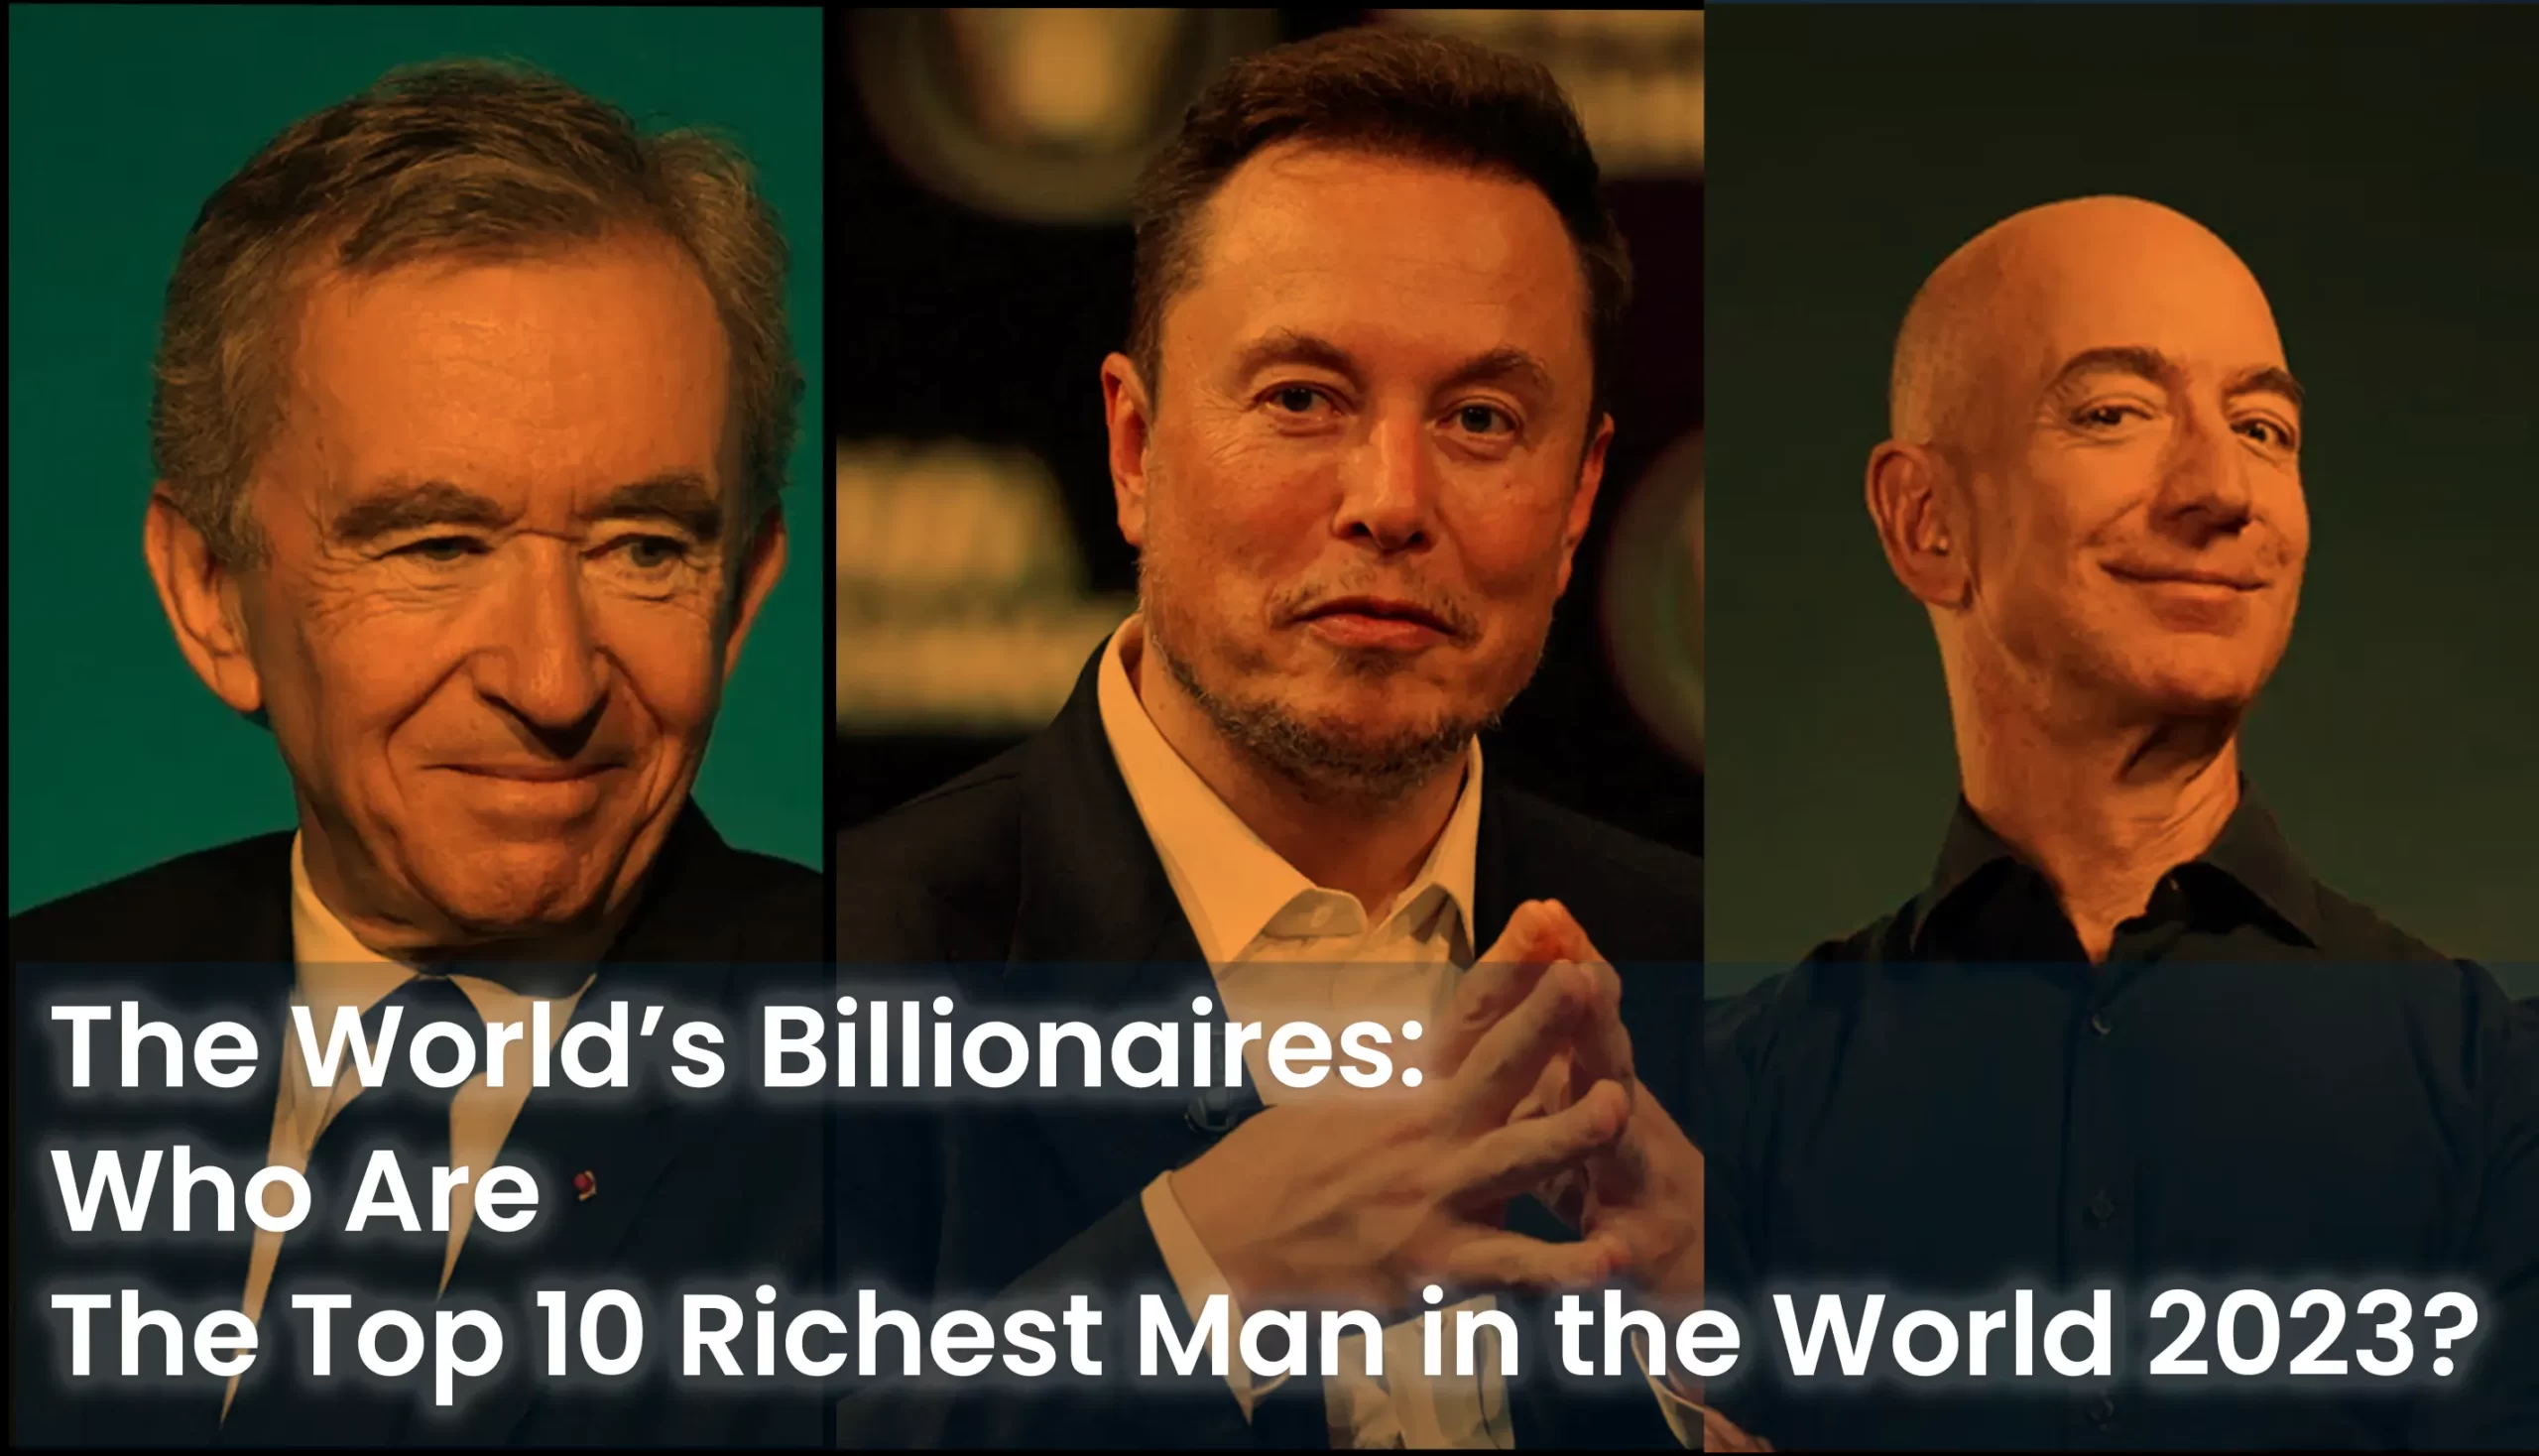 the top 10 richest man in the world